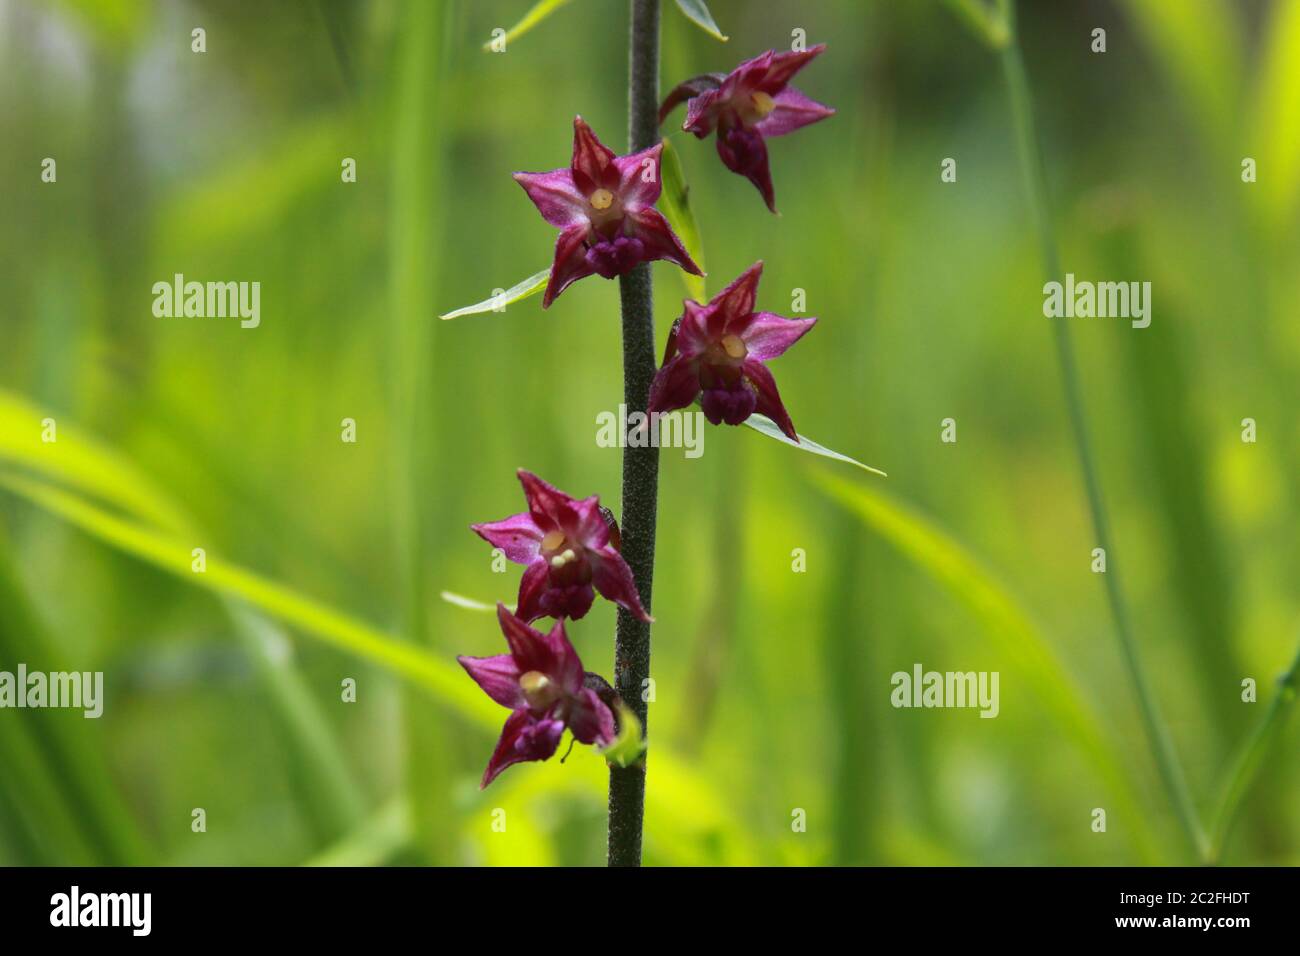 Cephalanthera rubra, known as red helleborine, is an orchid found in Europe, North Africa and southwest Asia. Stock Photo